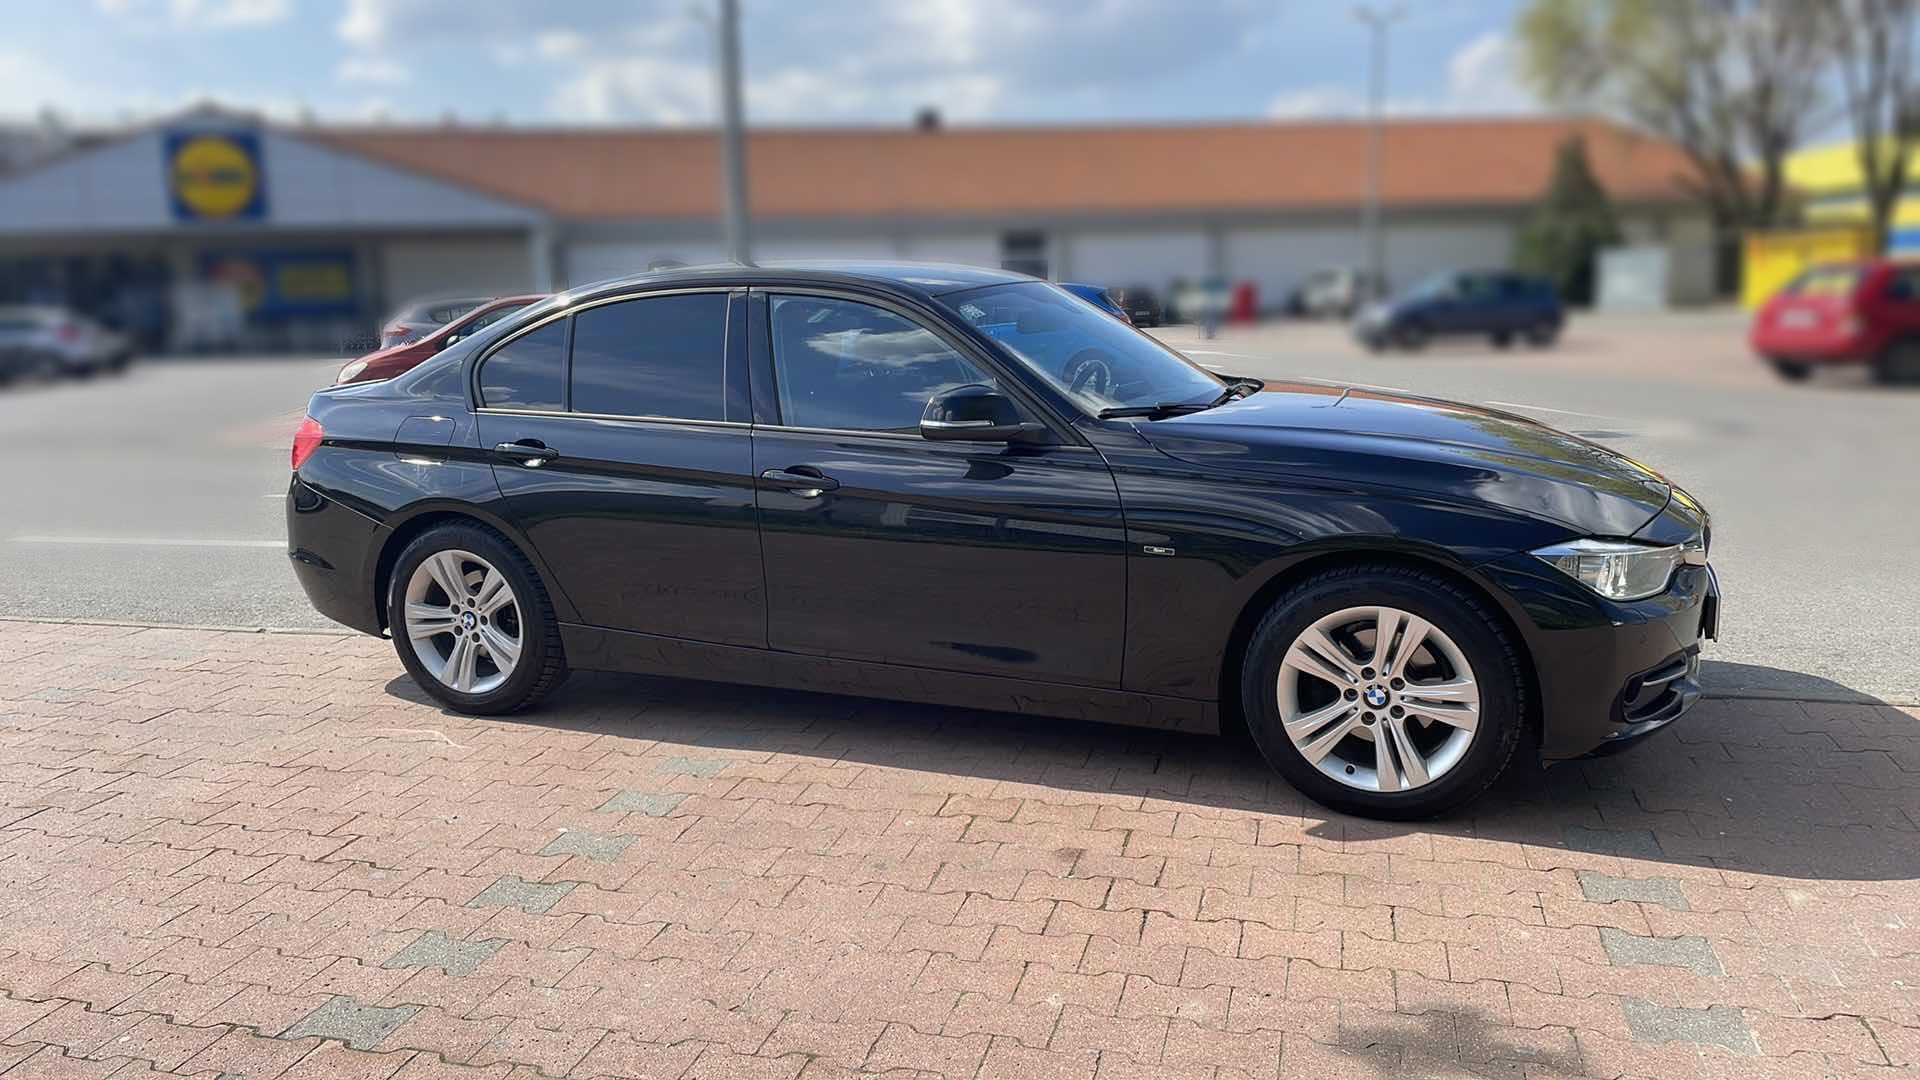 BMW 316d 154,074 km 13.779,<sup class=currency-decimal>77</sup> €